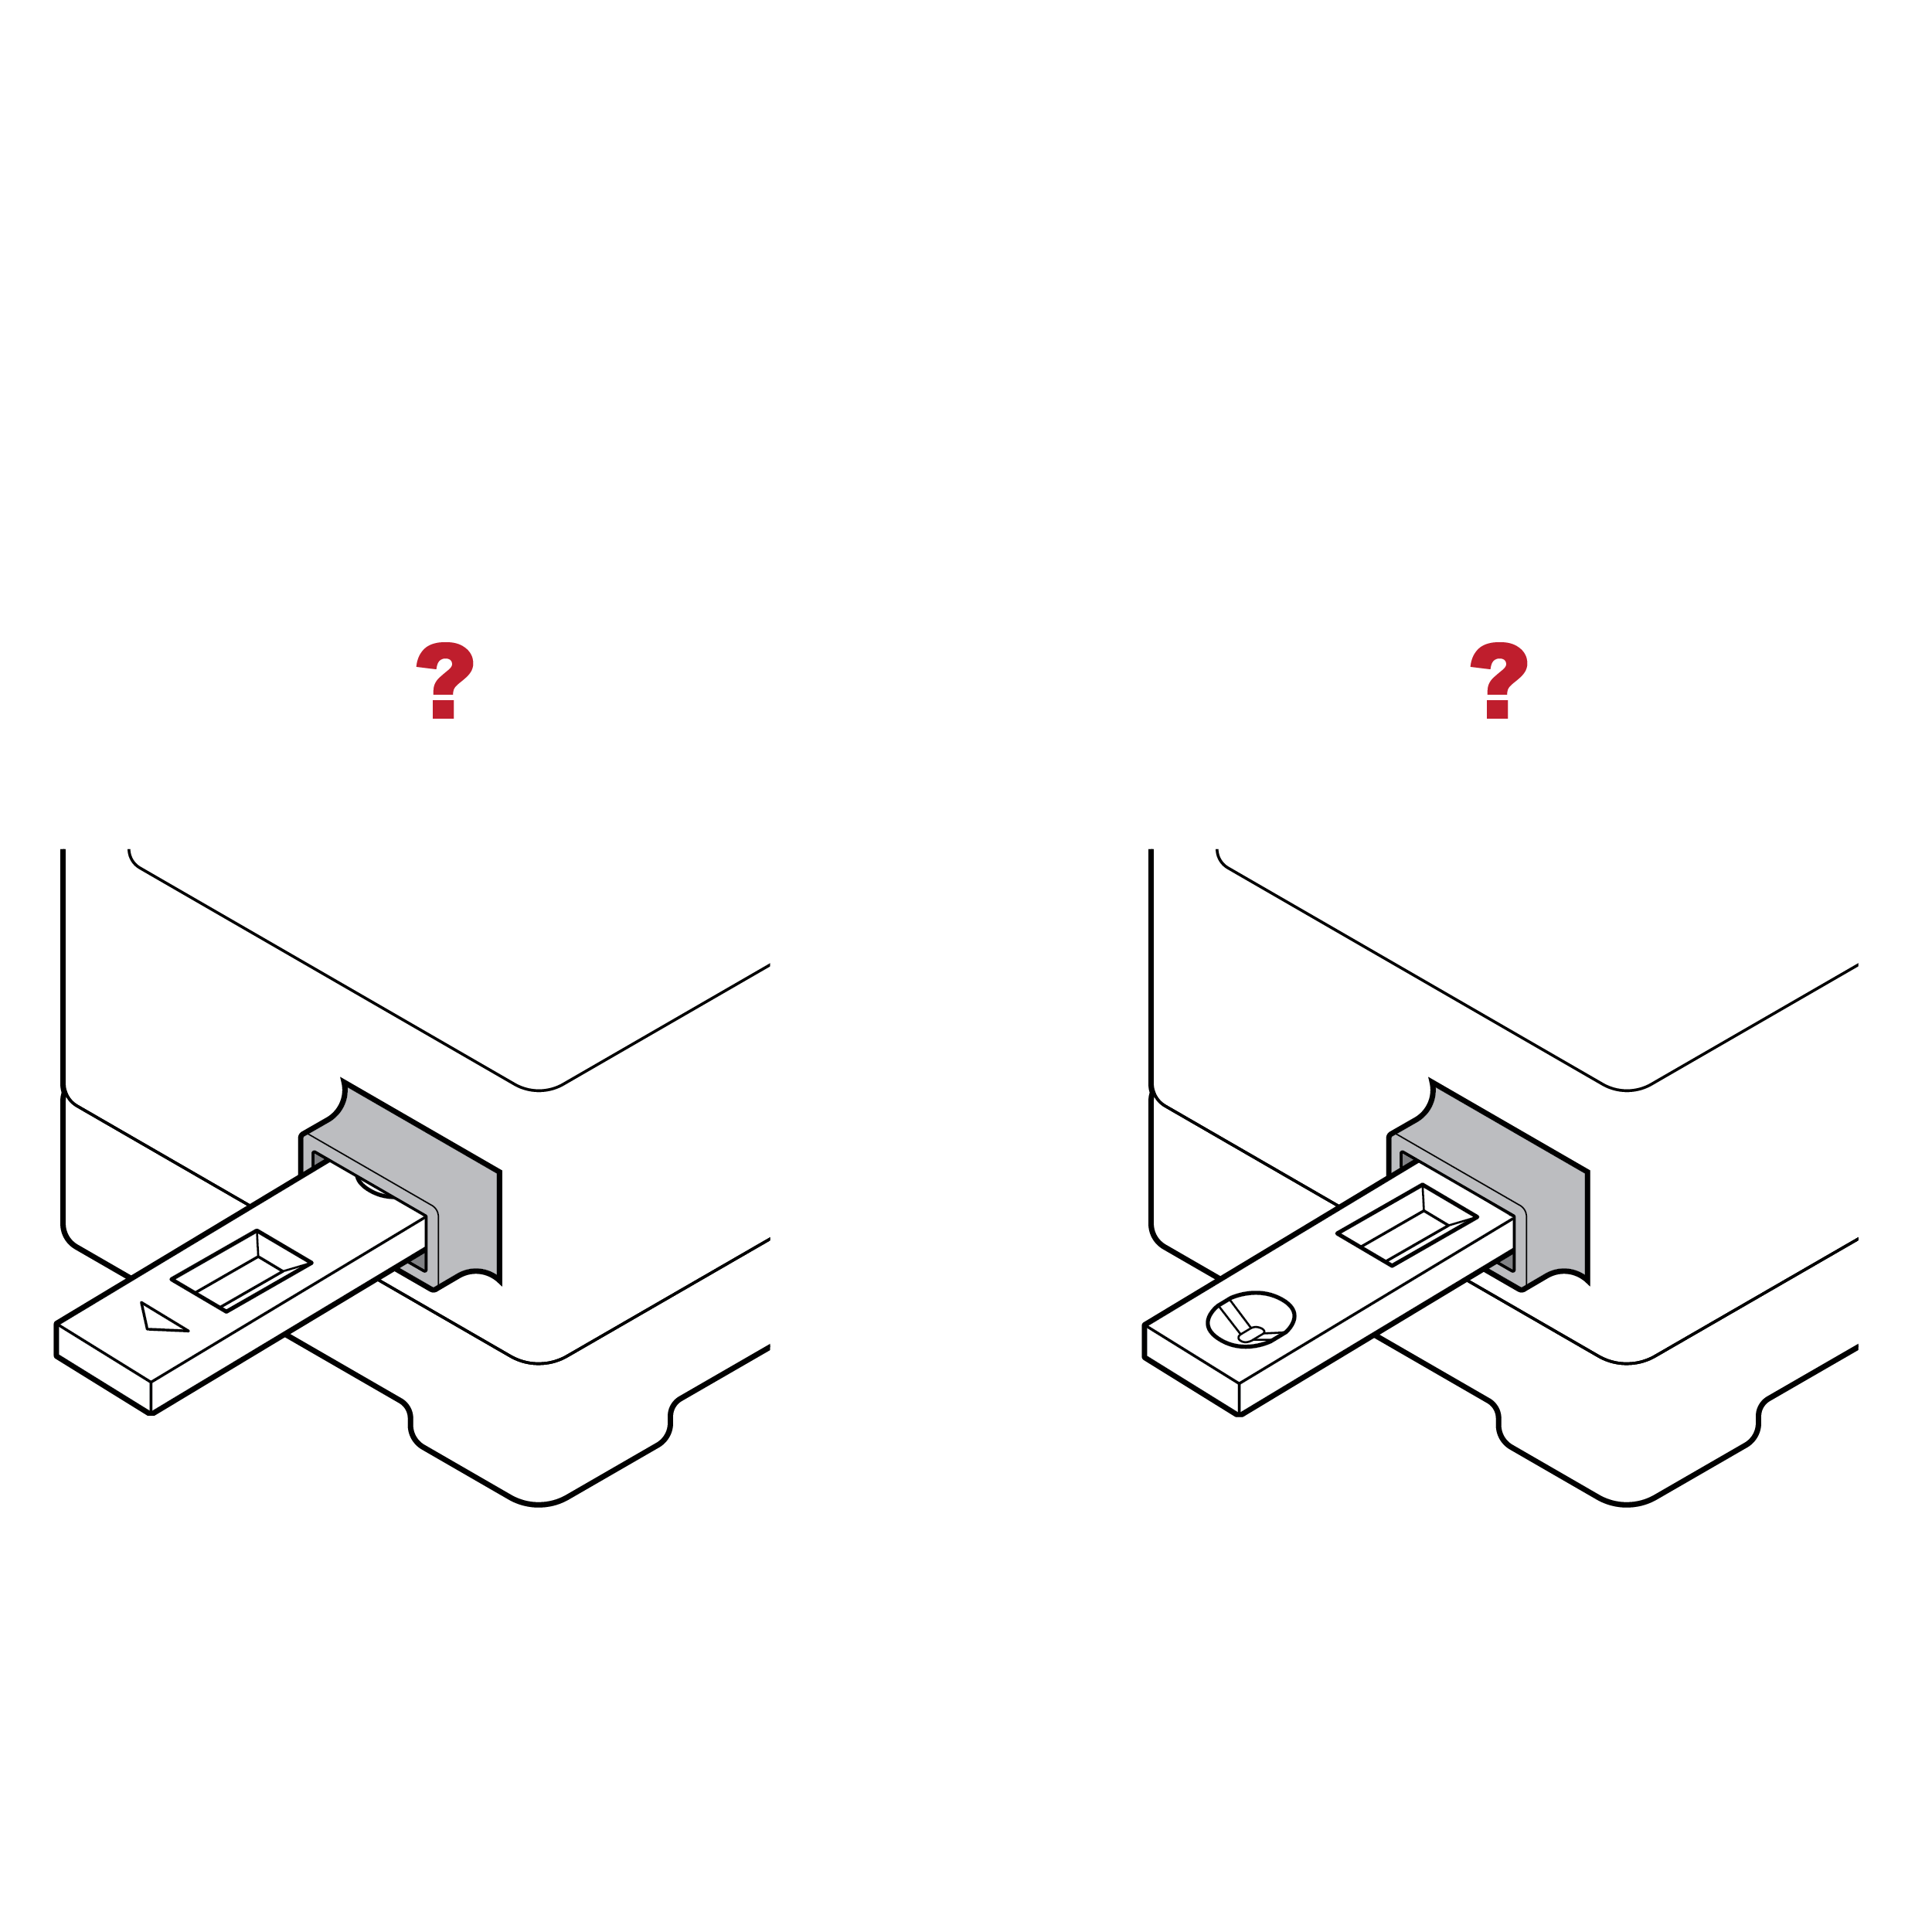 On the left, a cassette is inserted into a test reader in the incorrect orientation. On the right, a cassette is inserted into a test reader in the correct orientation. Above each test reader is a red question mark, indicating a lack of feedback to the user on correct insertion of the cassette.